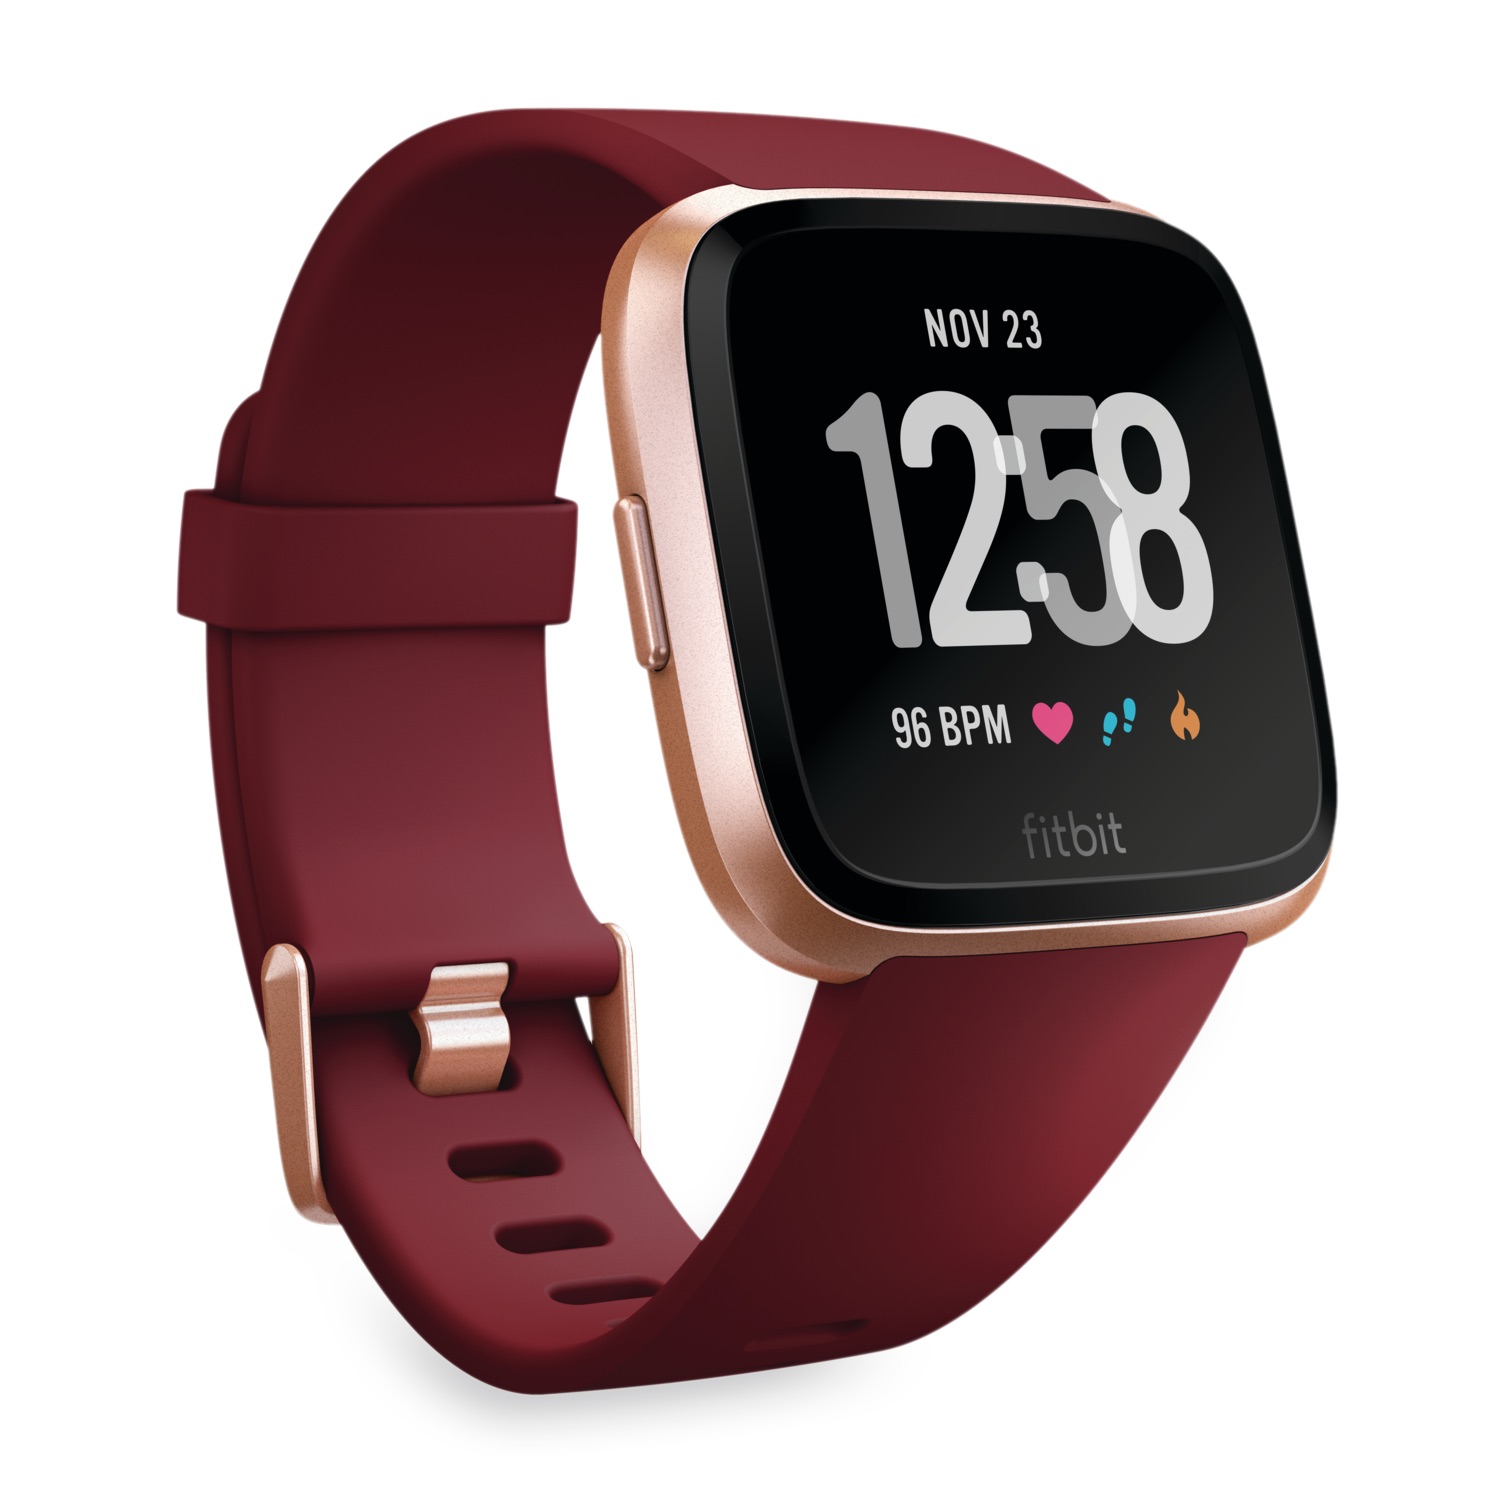 kohl's fitbit charge 3 black friday